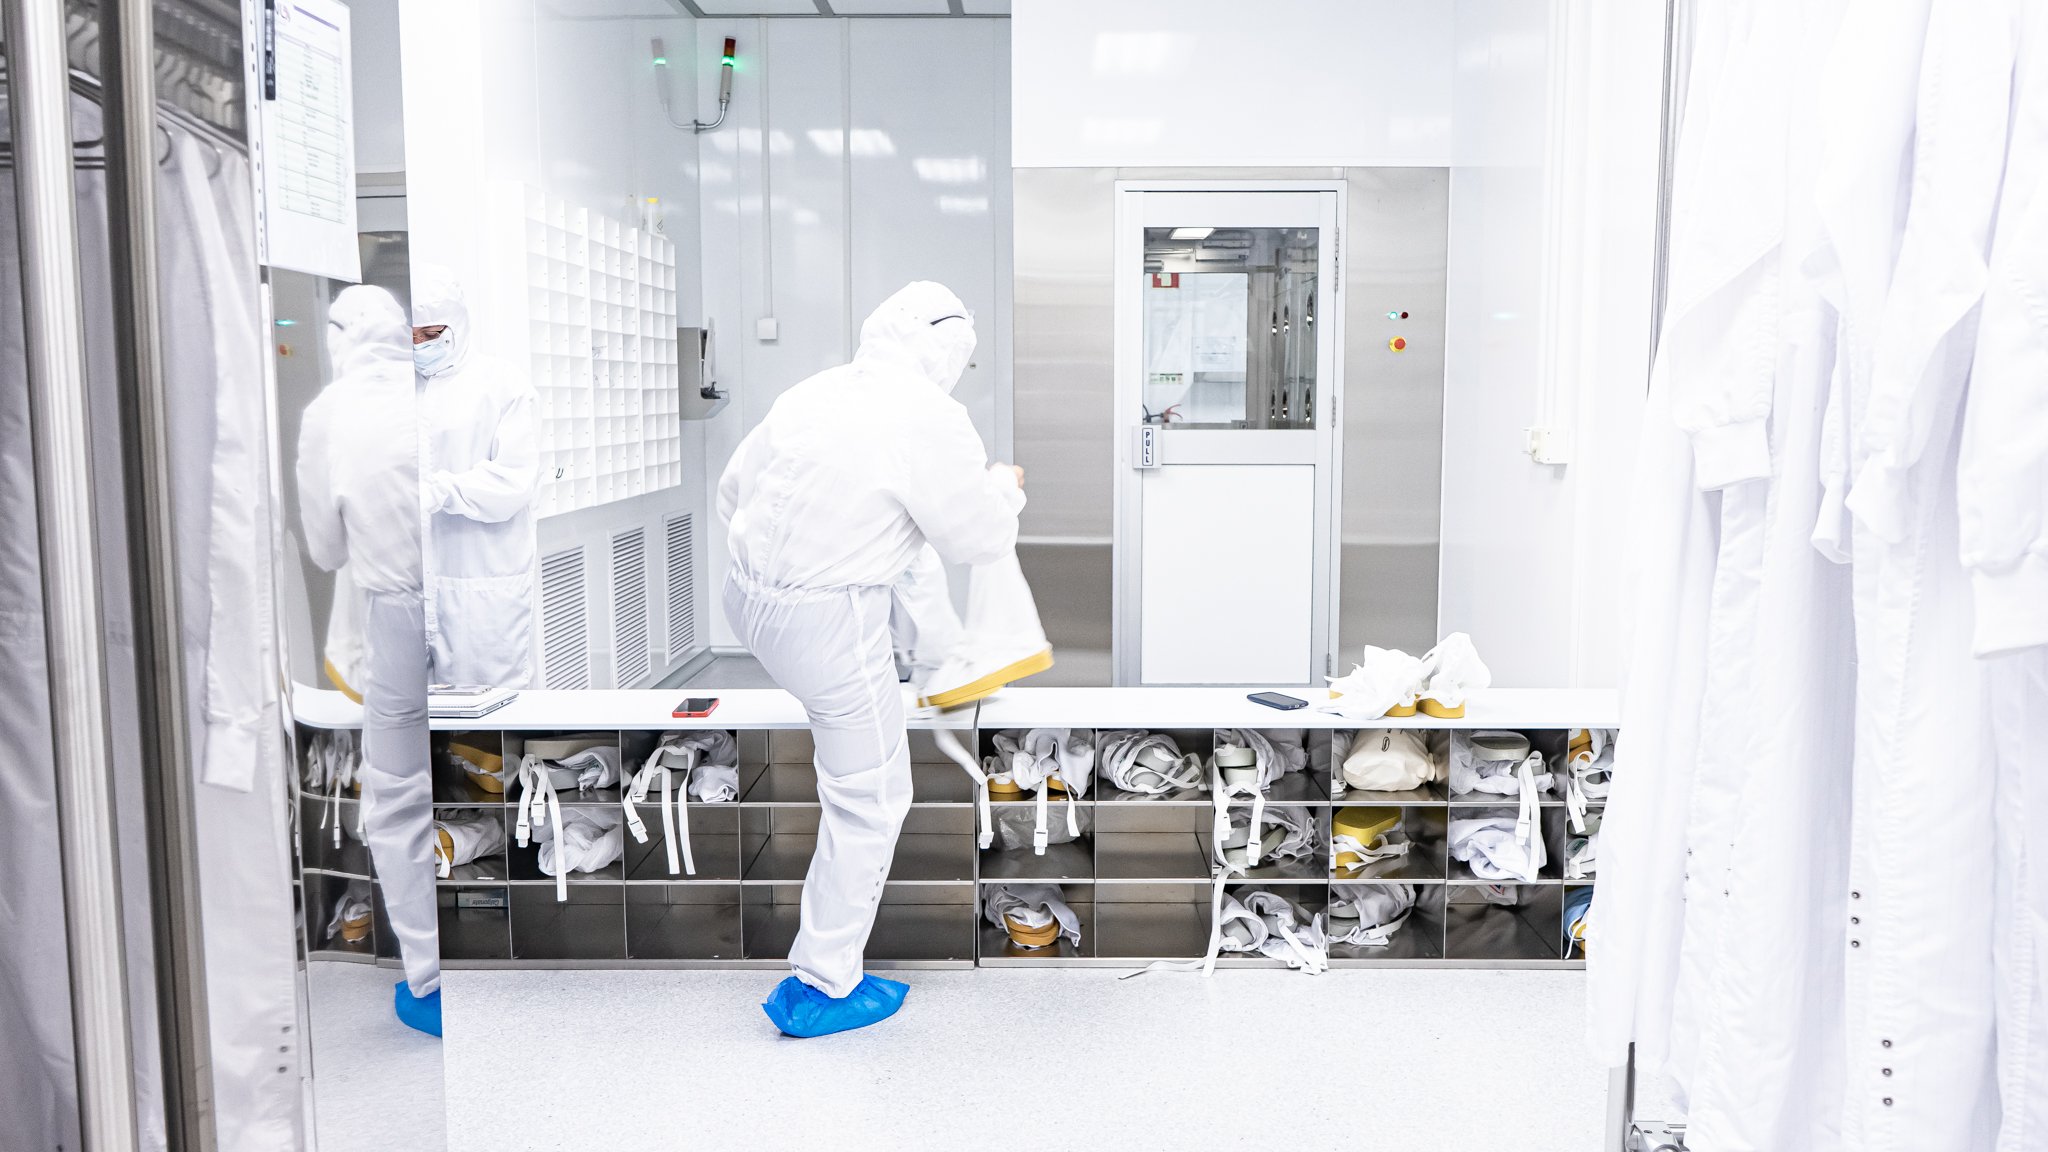 Cleanroom Processes and Equipment performance management, an interview with José Rodrigues – Facility Manager